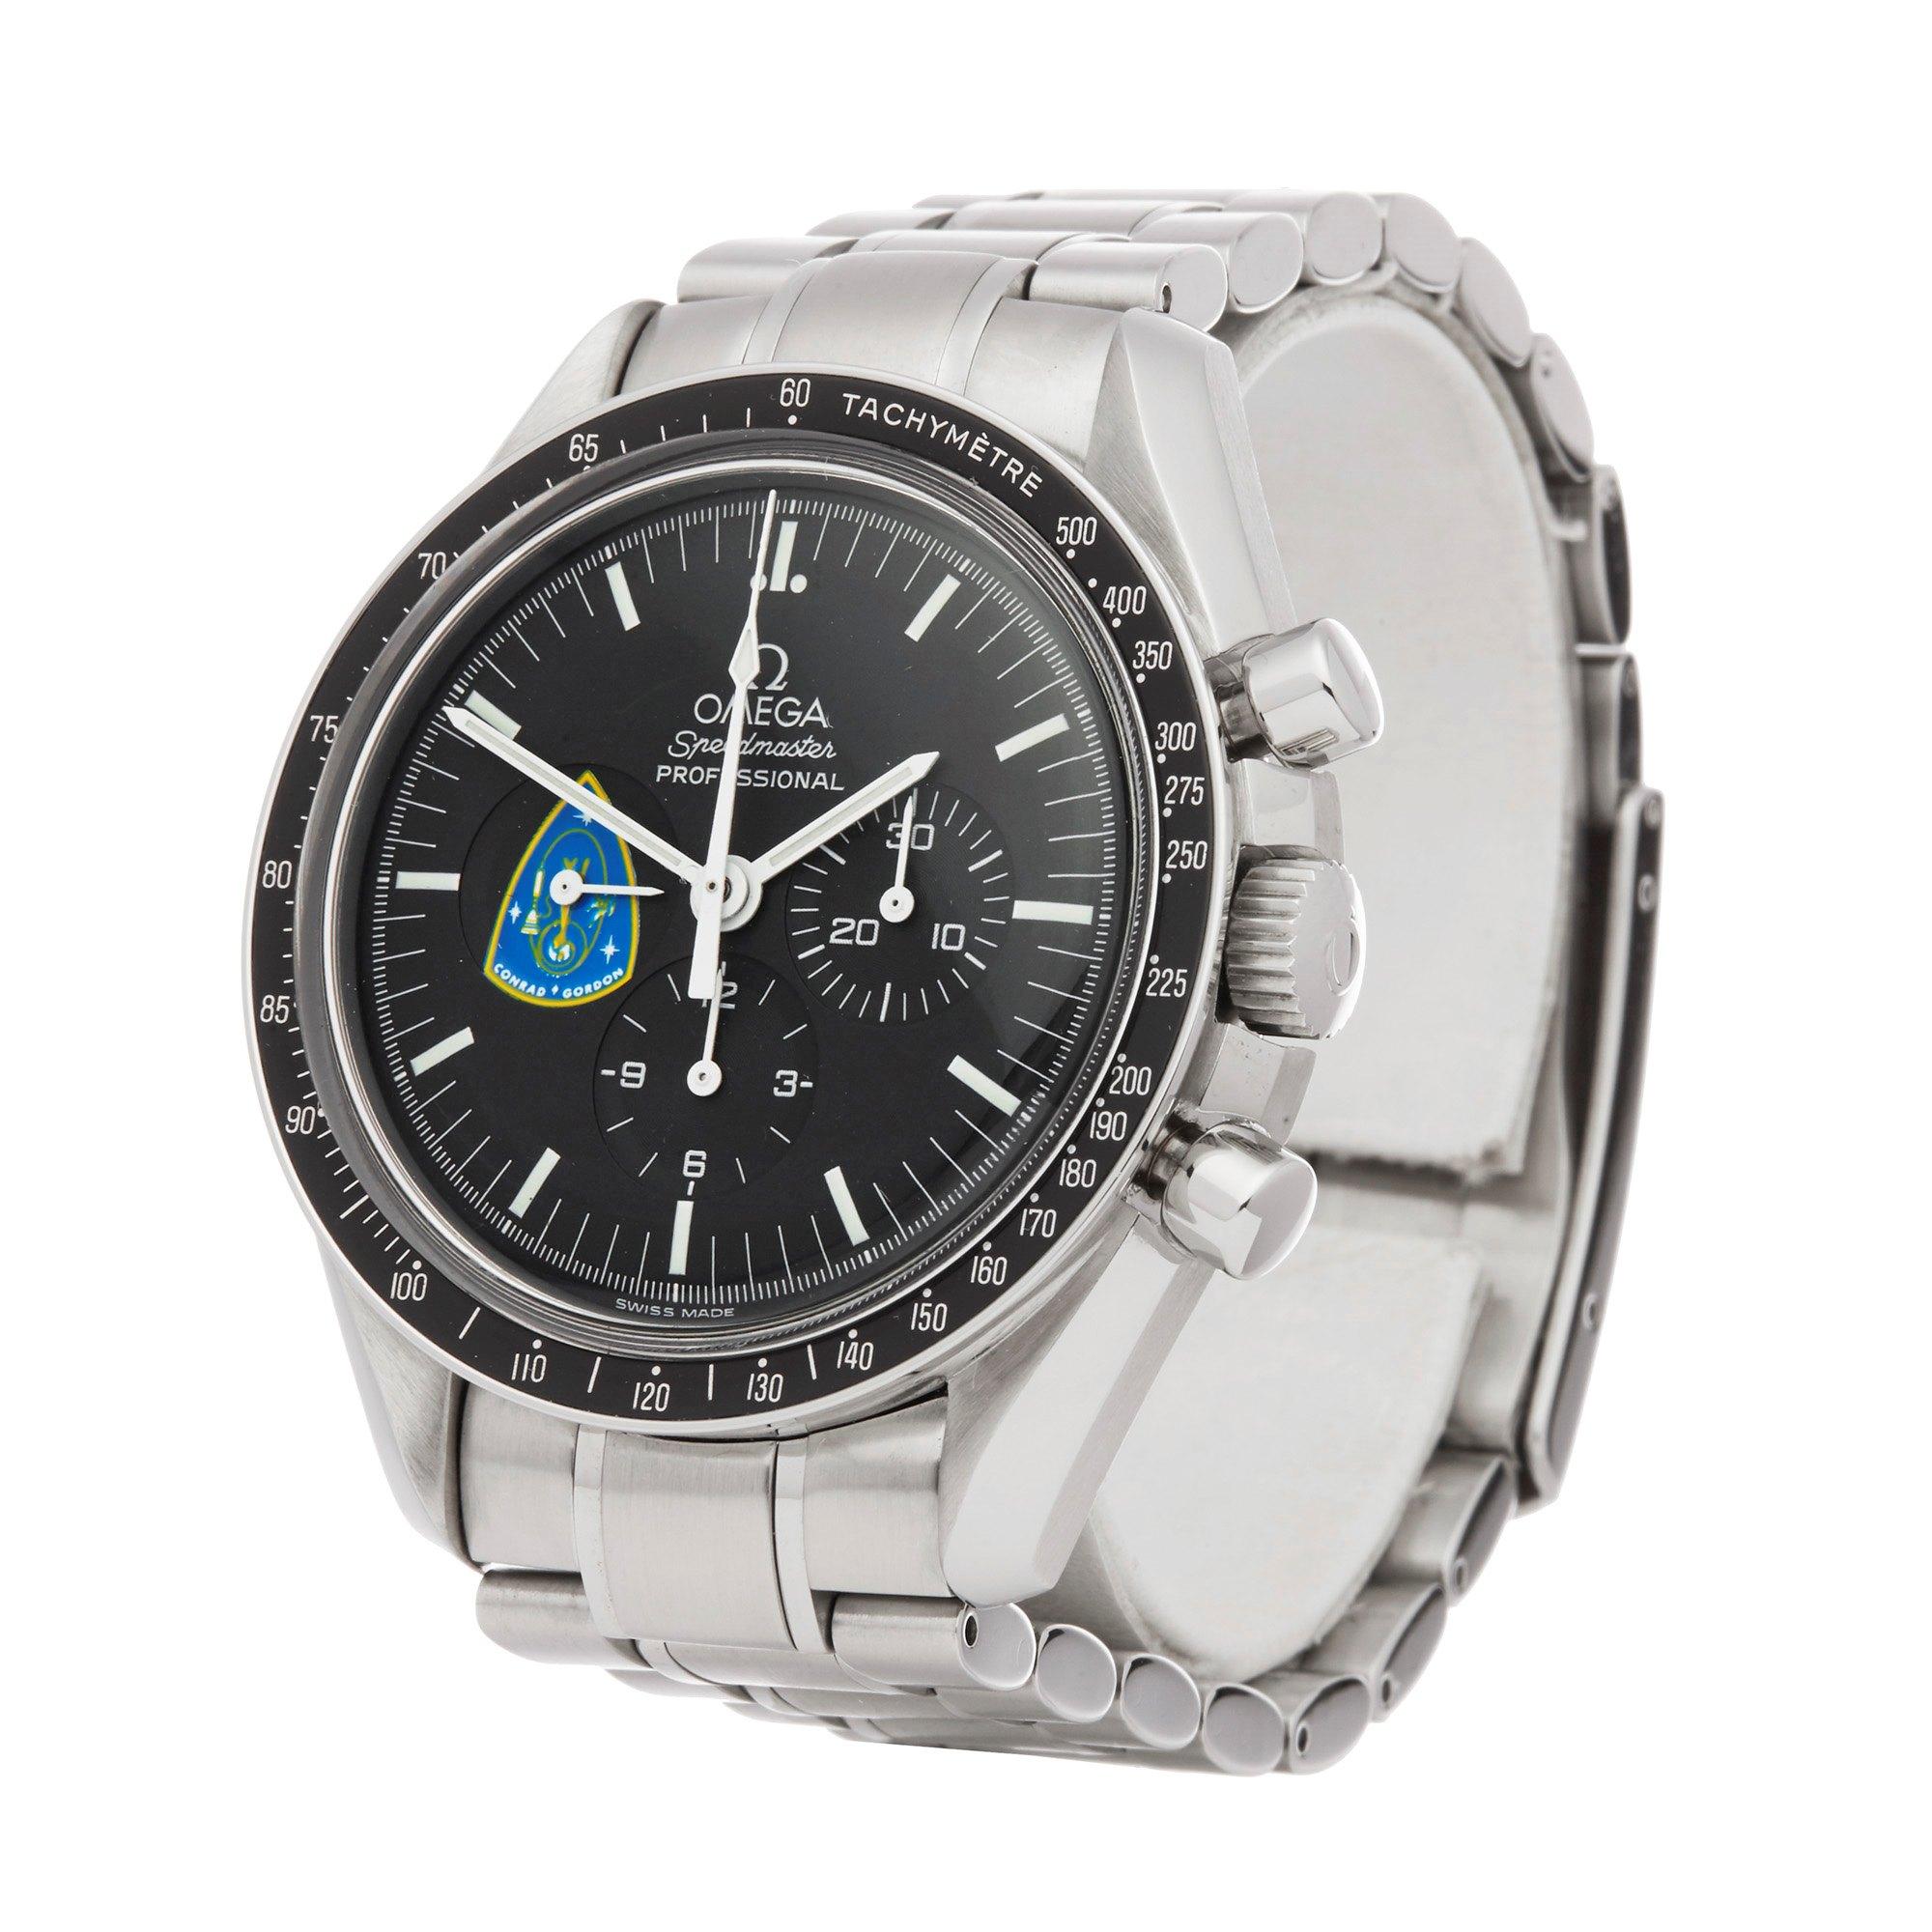 Xupes Reference: COM002543
Manufacturer: Omega
Model: Speedmaster
Model Variant: Missions
Model Number: 145.0022 3450022
Age: 1994
Gender: Men
Complete With: Omega Service Pouch
Dial: Black Baton
Glass: Plexiglass
Case Material: Stainless